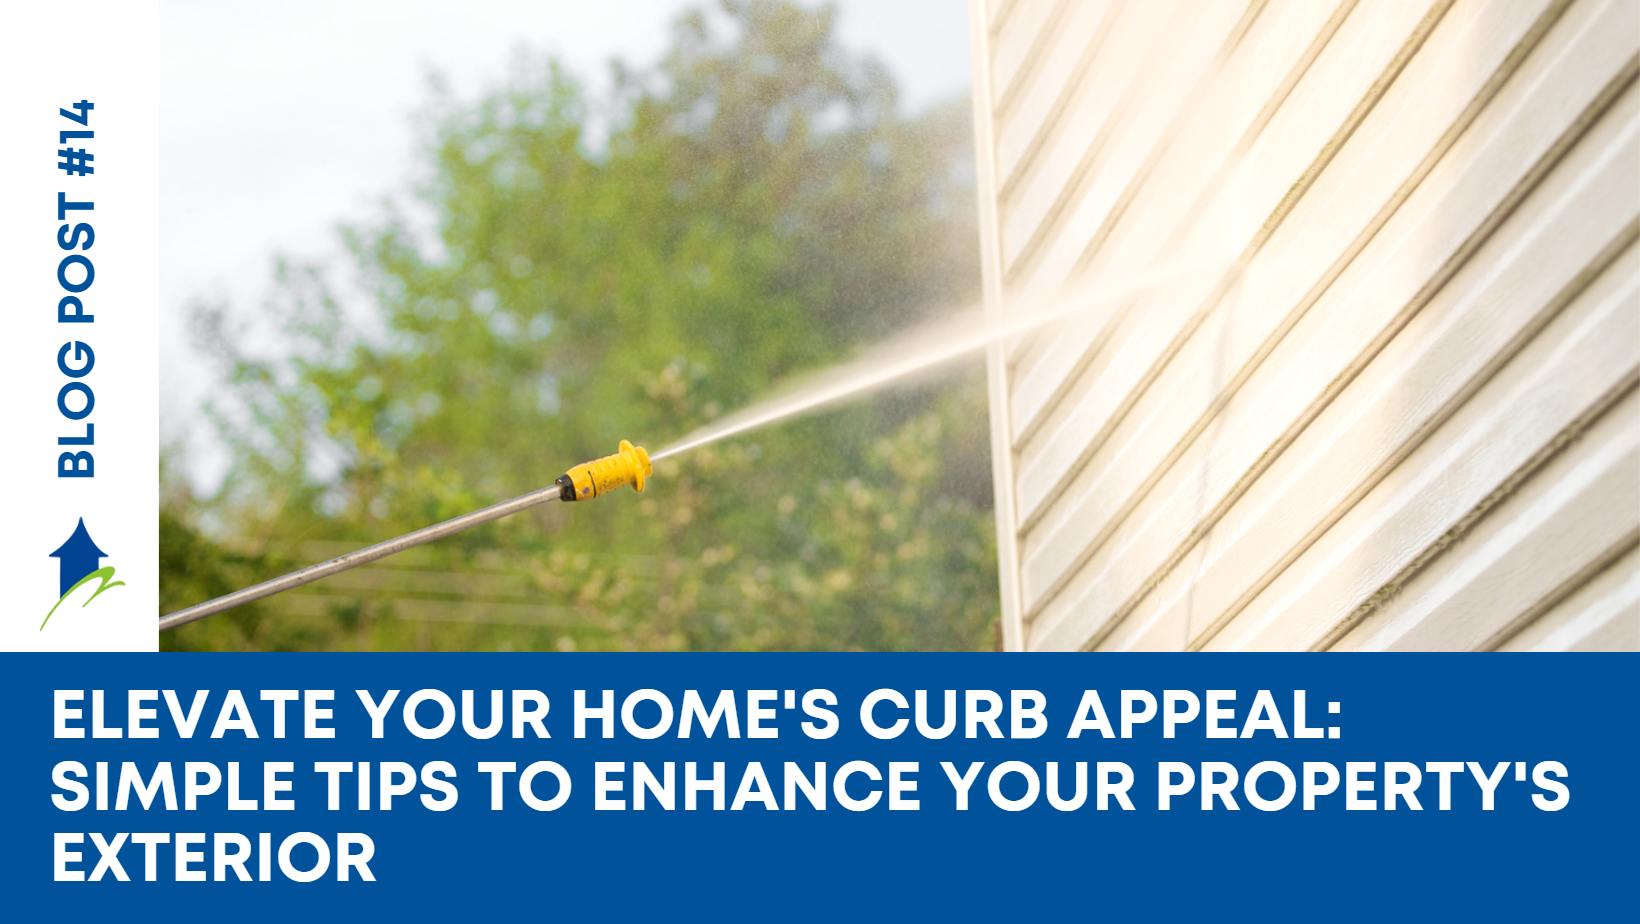 Elevate Your Home’s Curb Appeal: Simple Tips to Enhance Your Property’s Exterior